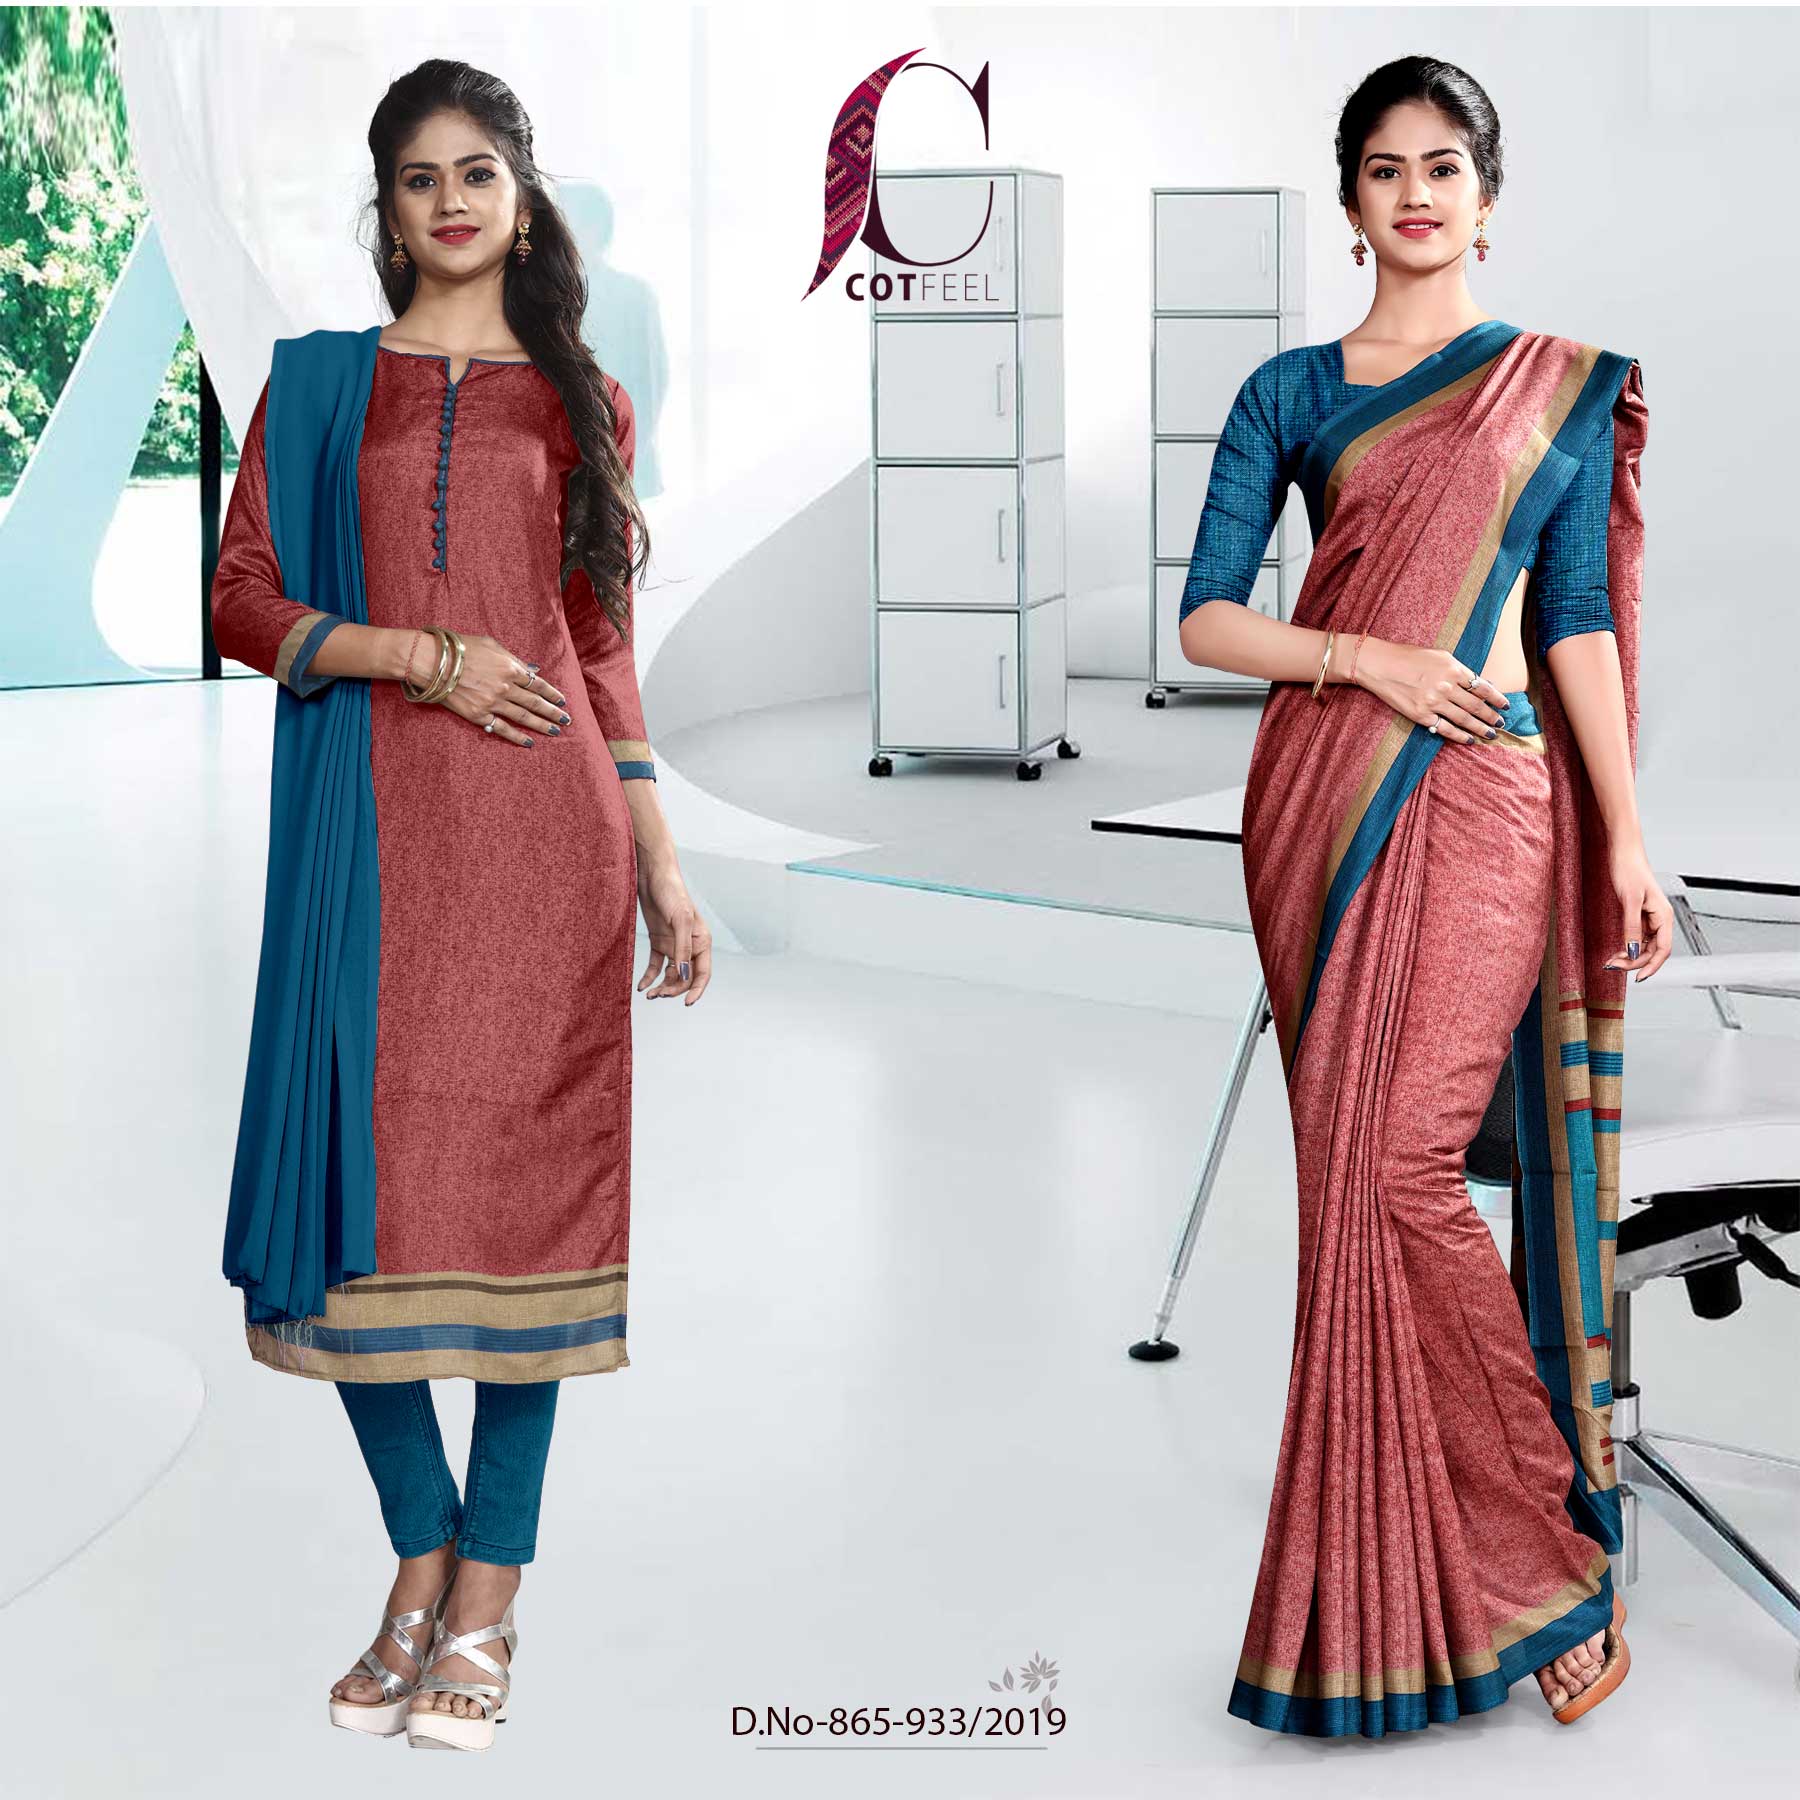 Formal Wear Printed Uniform Sarees And Salwar Kameez Combo For Teachers,  6.3 M (With Blouse Piece) at Rs 1500 in Surat